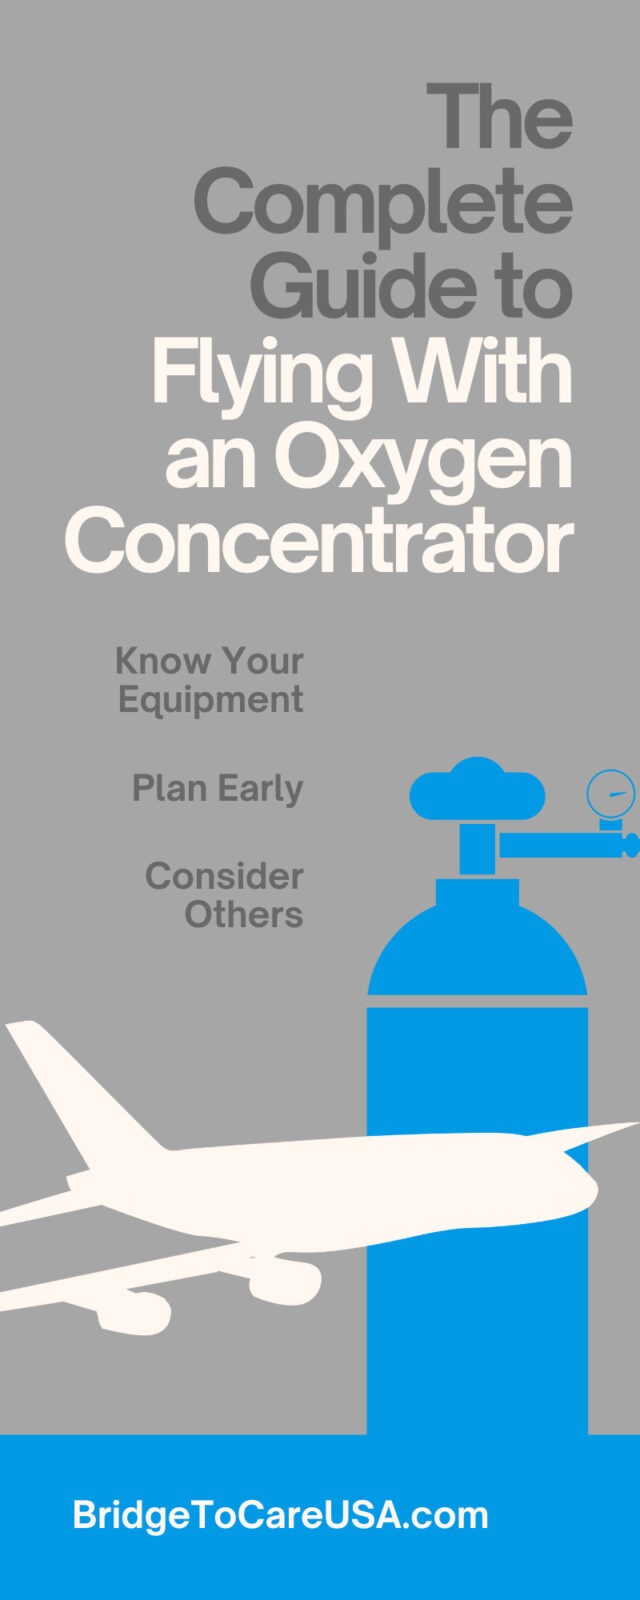 The Complete Guide to Flying With an Oxygen Concentrator